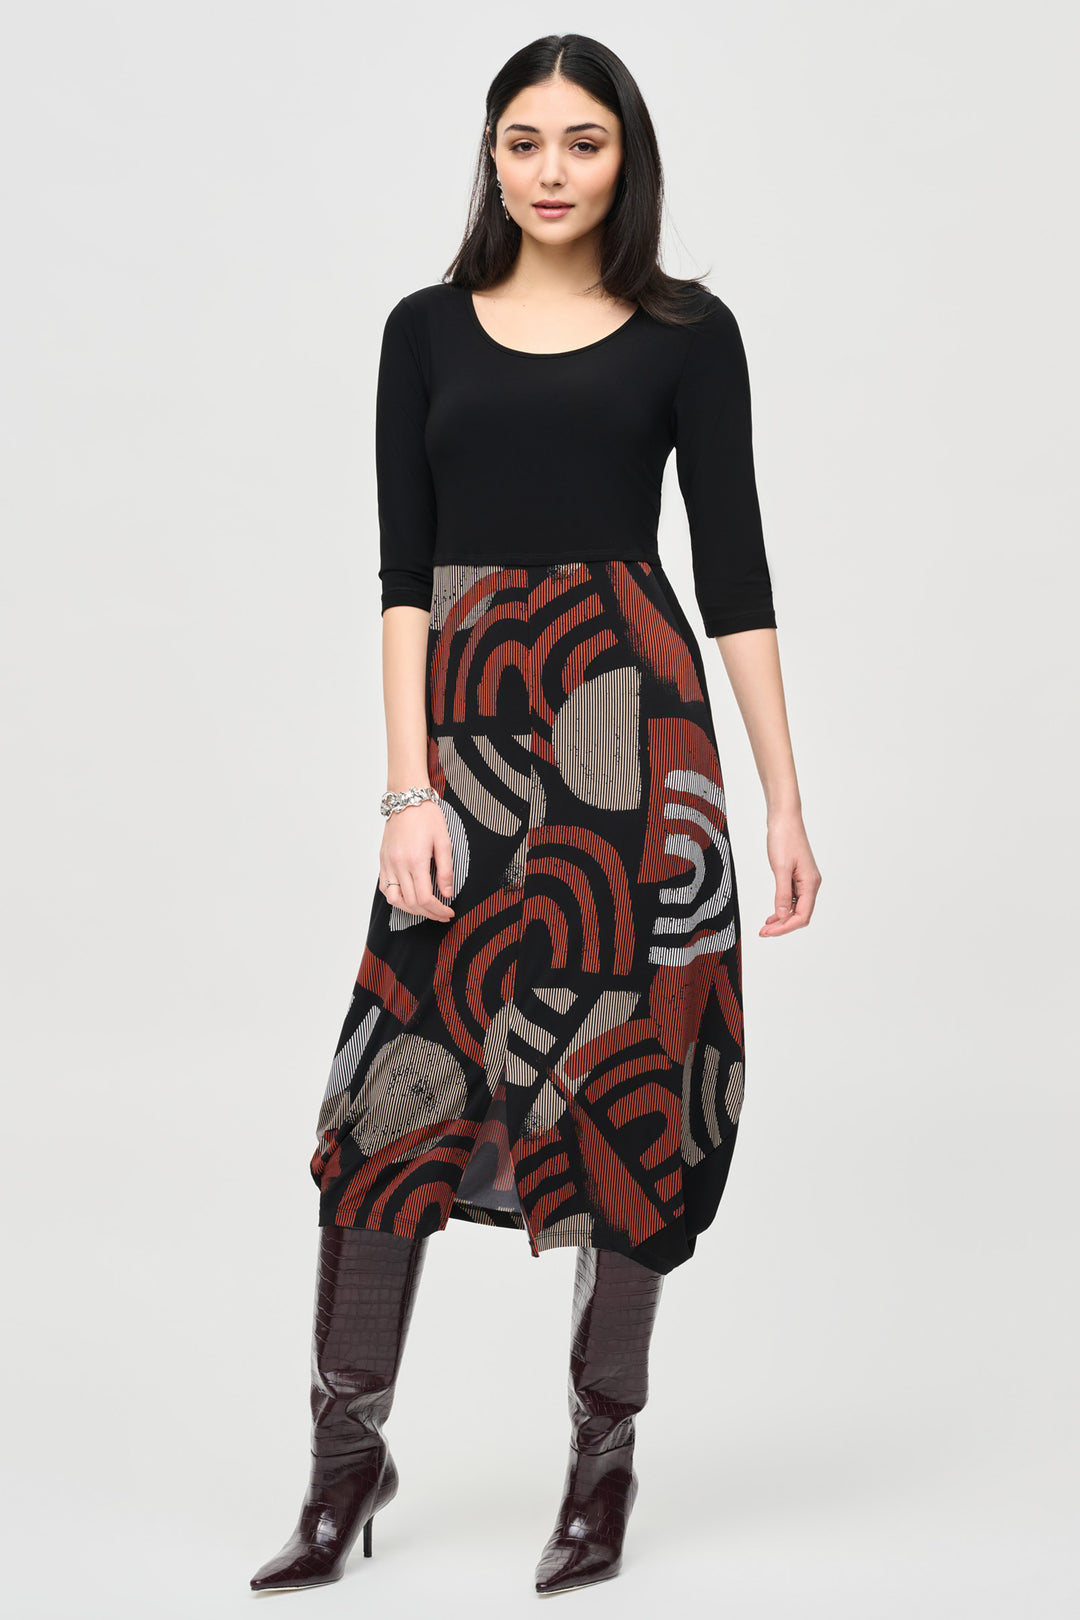 Joseph Ribkoff Fall 2024 Introducing our Geometric Print Cocoon Dress, featuring a midi length design with a sleek front slit cut. The neat geometric or abstract print adds a touch of elegance, while the skirt style and 3/4 straight sleeves provide comfort and versatility all season long.